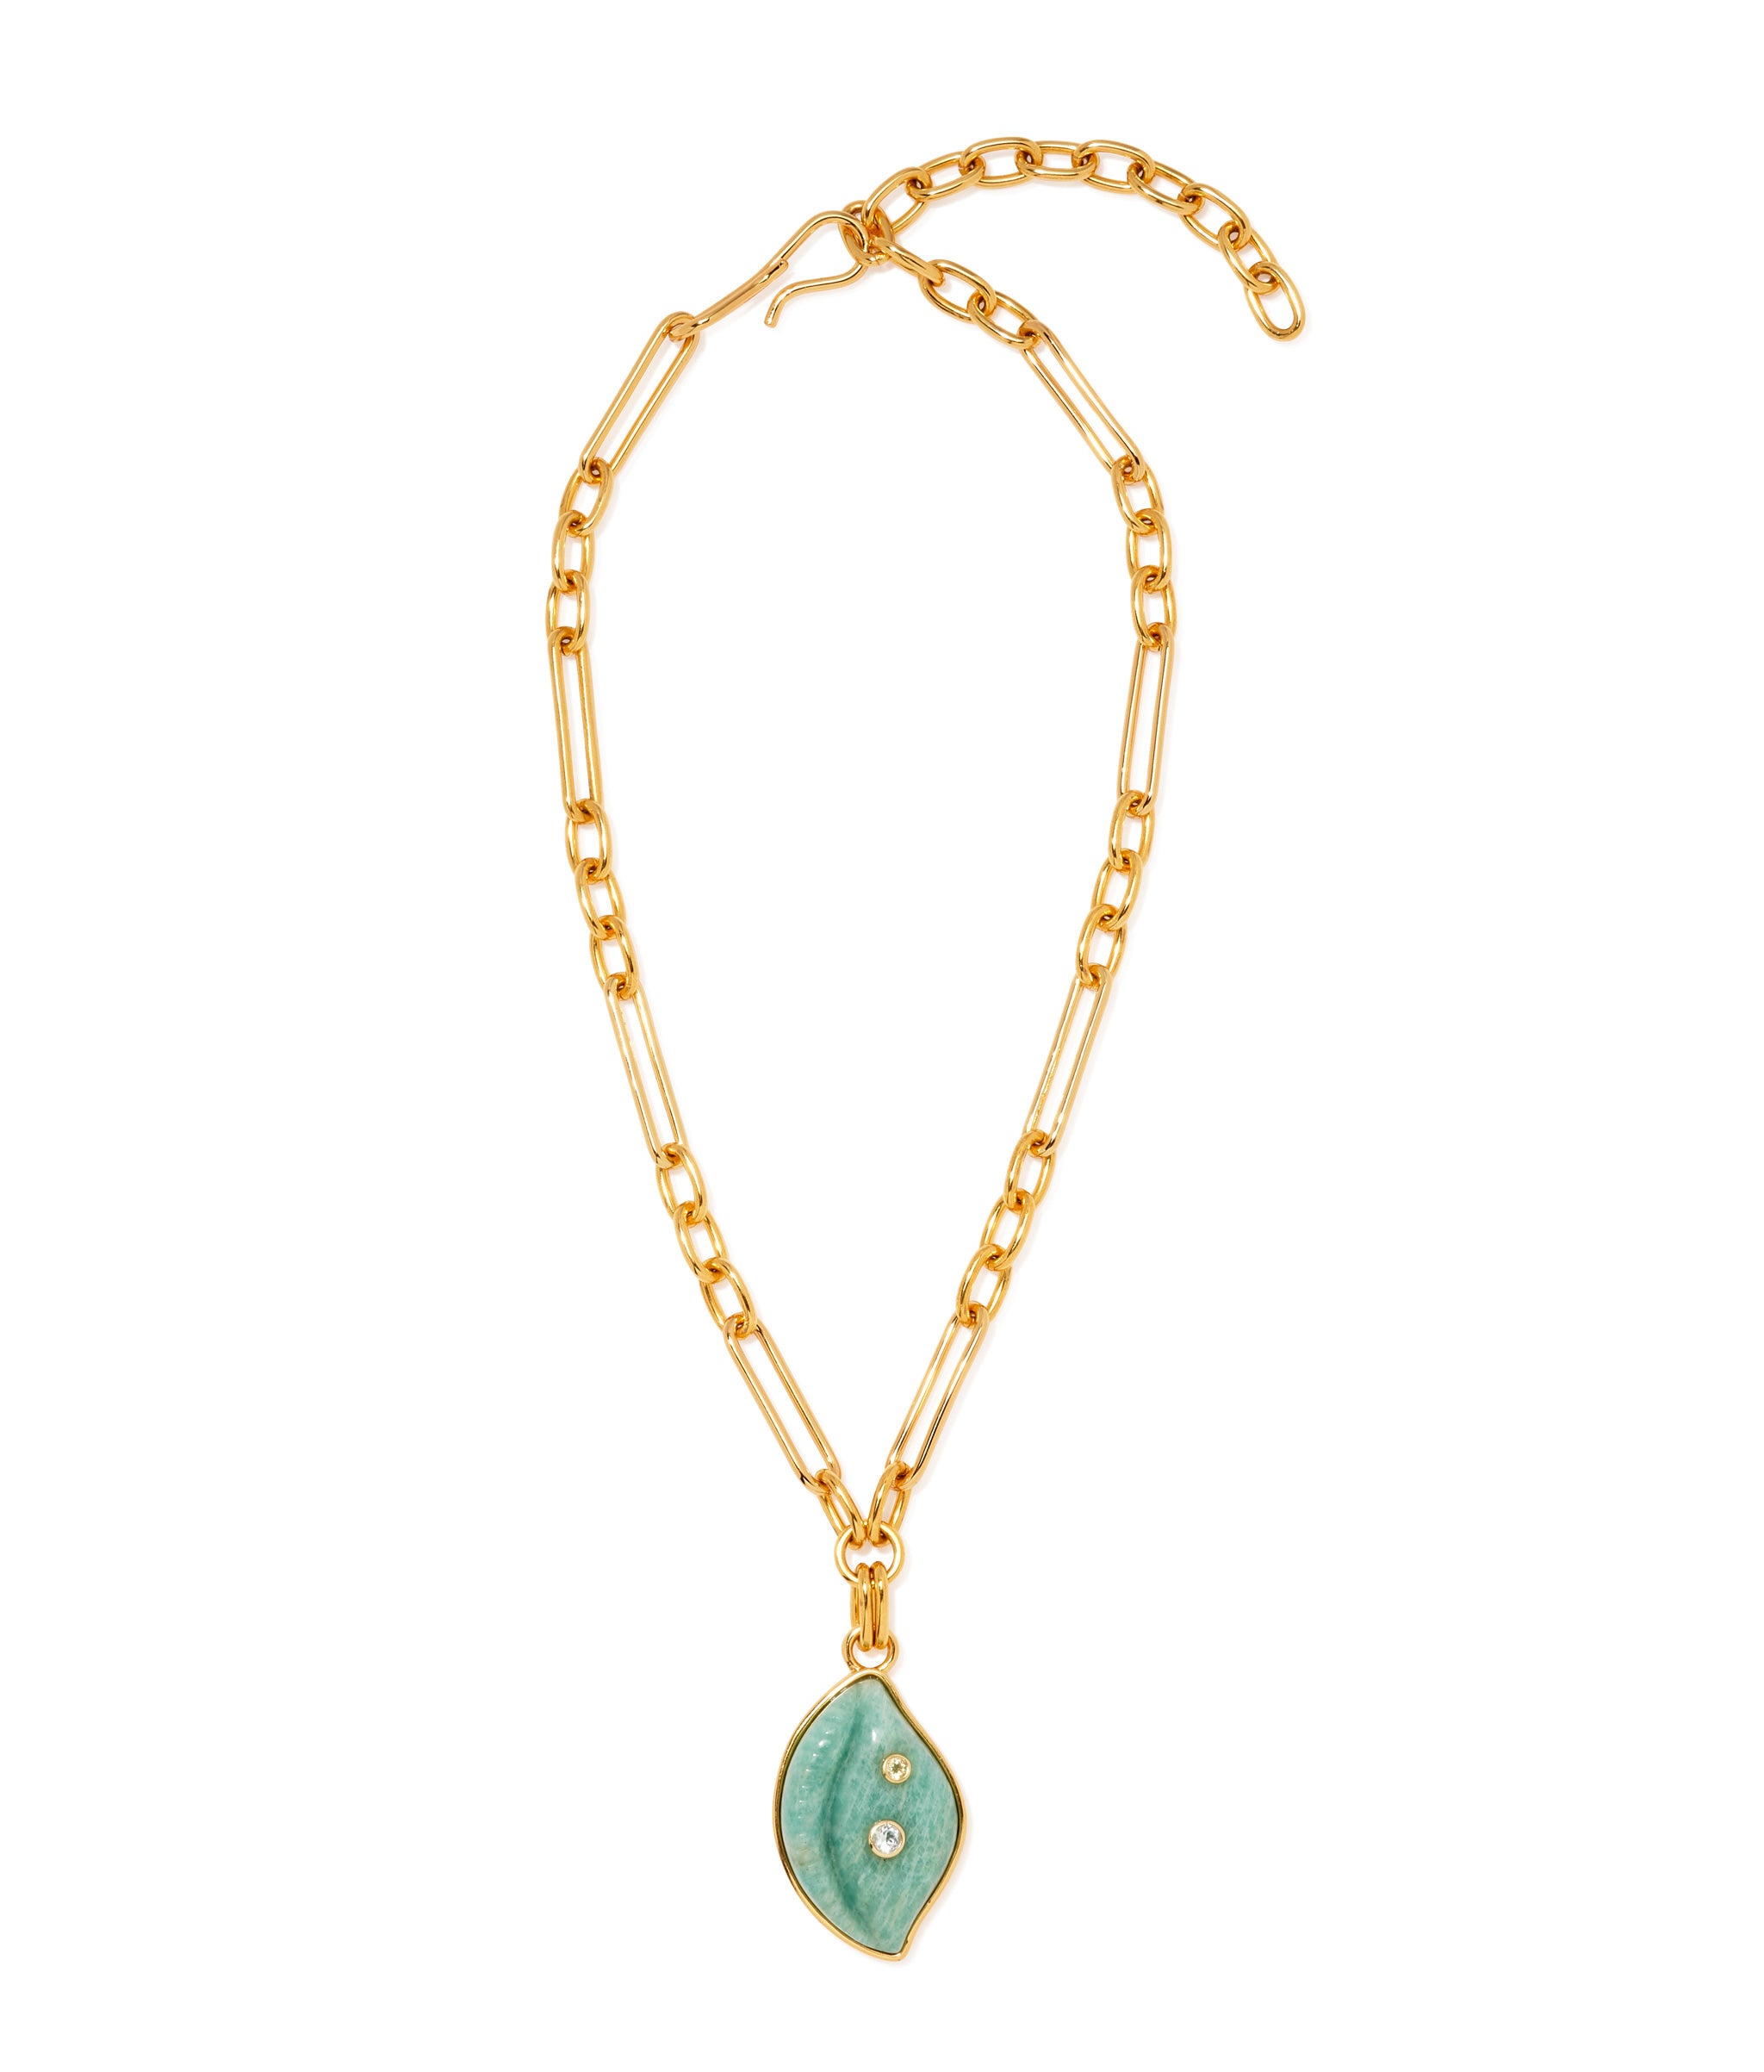 Cowrie Shell Necklace in Amazonite. Gold-plated brass chain, amazonite shell pendant with lemon quartz and blue topaz.